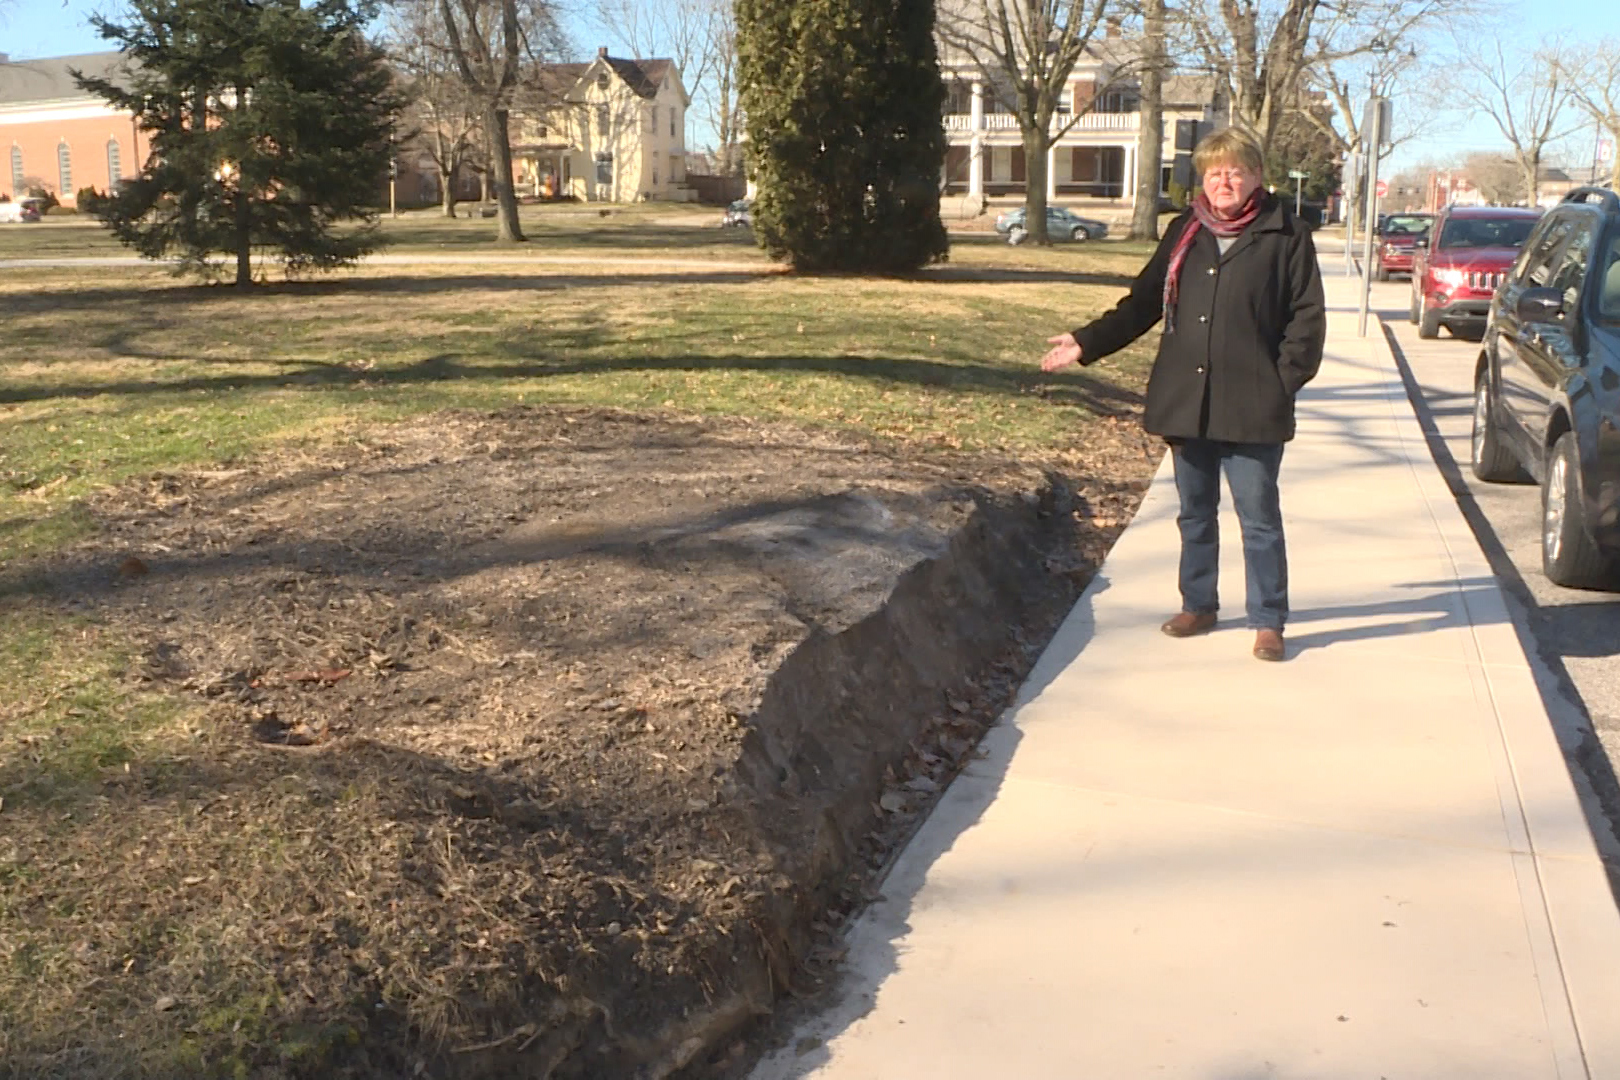 Sue Lucas says this covered stump in front of Lane Place in Crawfordsville used to be a roughly 200-year-old tree. The city is losing many of its older trees and trying to figure out how best to replace them.